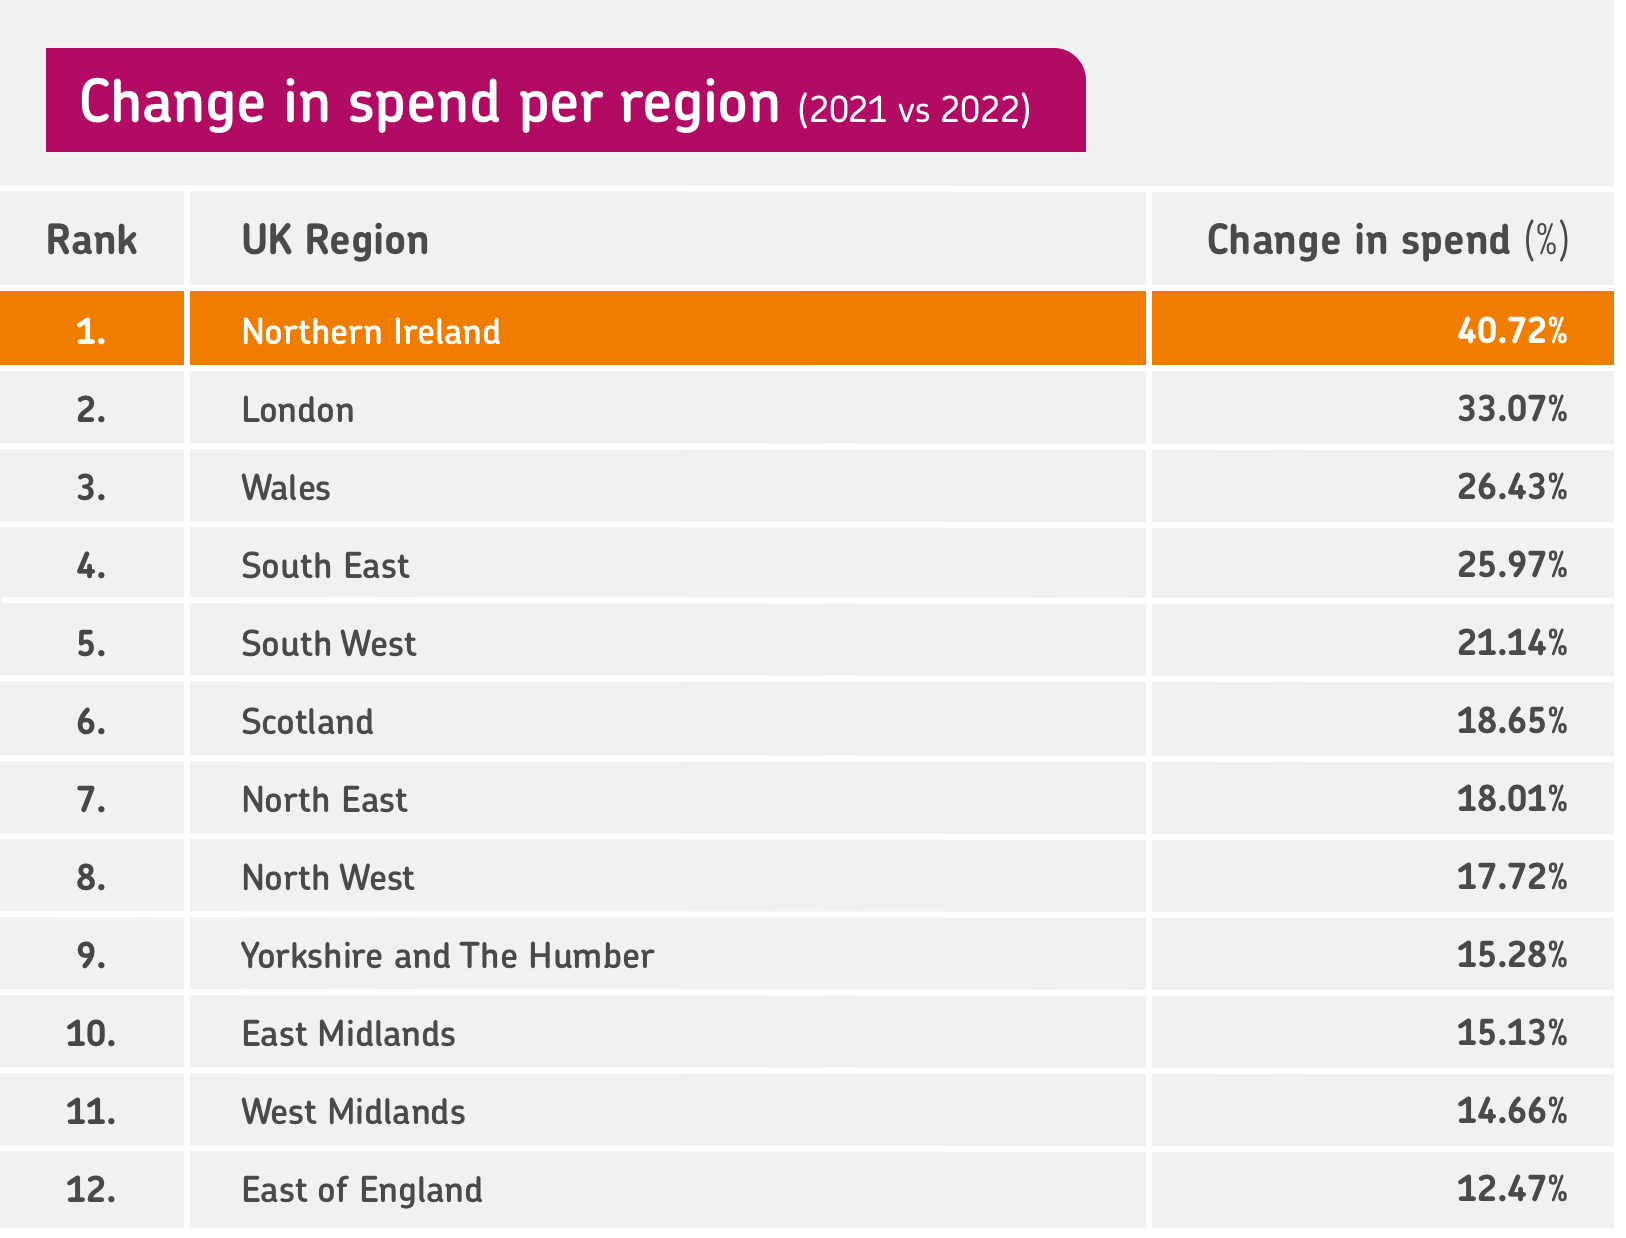 Table showing how spending increased for each region in 2022 vs 2021, with Northern Ireland highlighted at the top